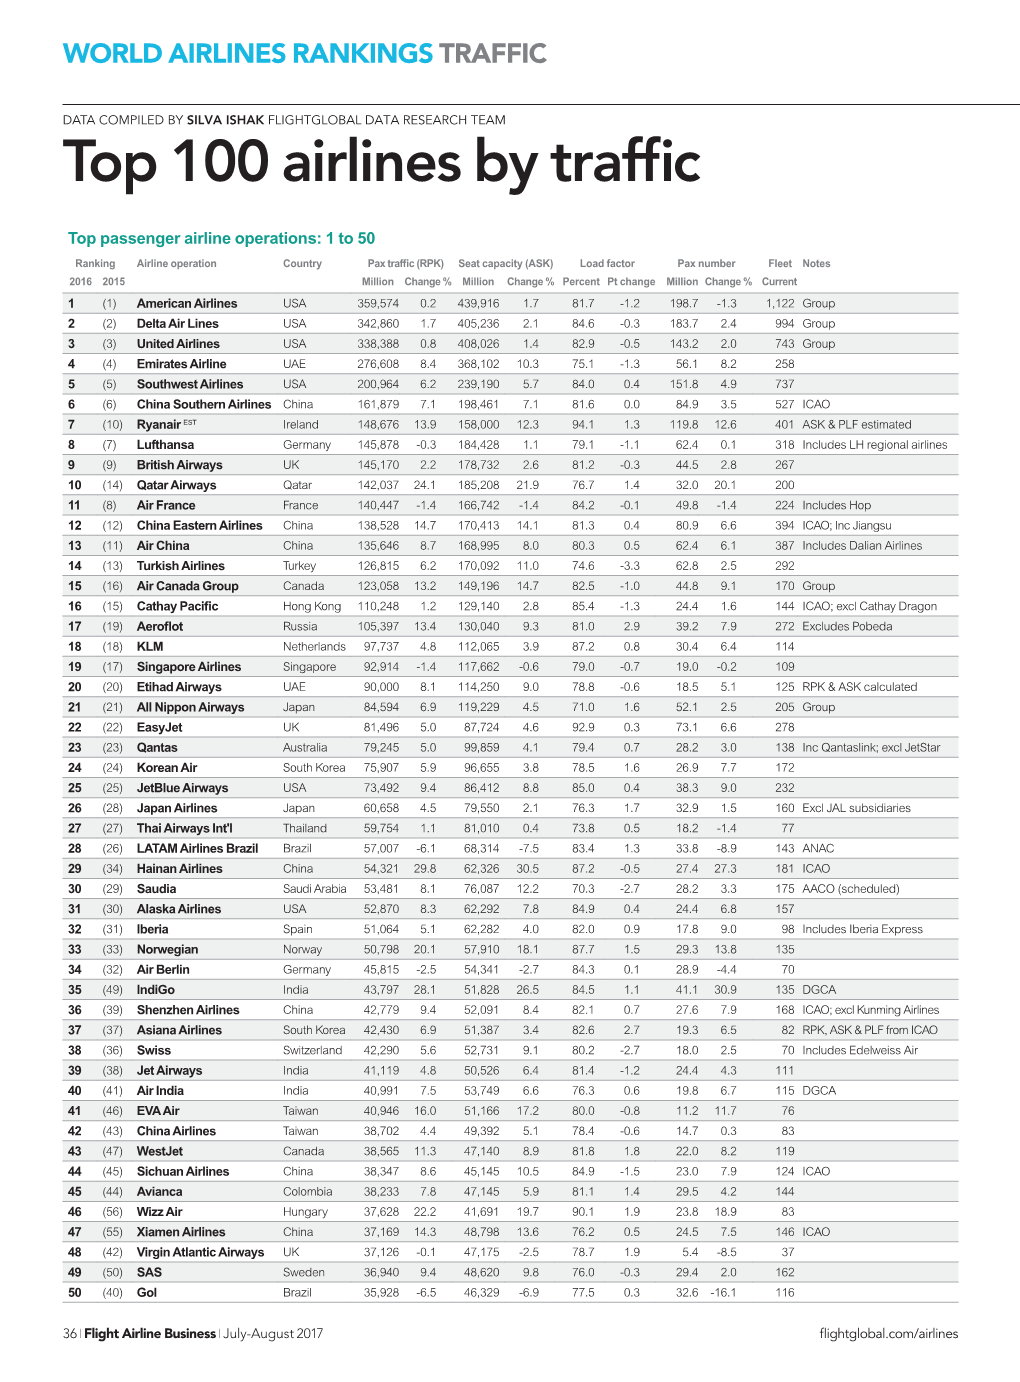 Top 100 Airlines by Traffic